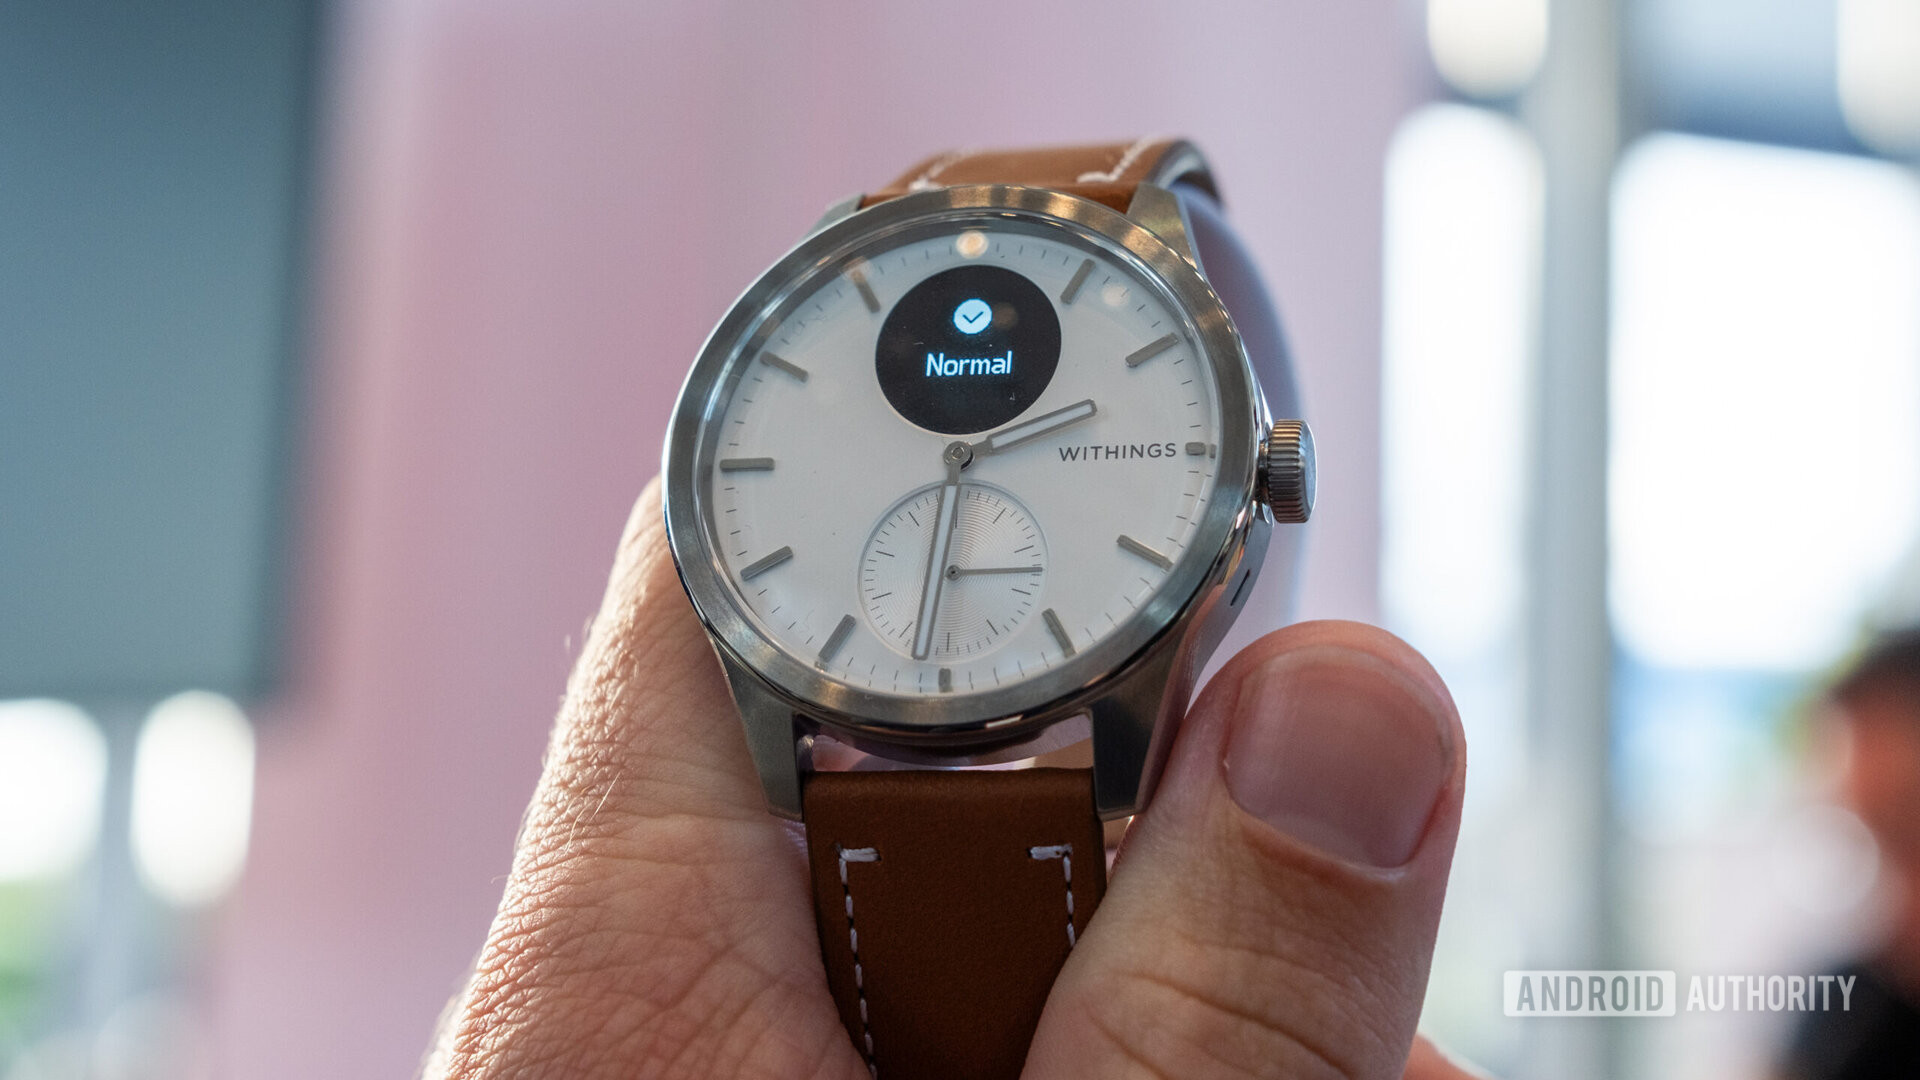 Withings Scanwatch 2 with brown leather strap in hand